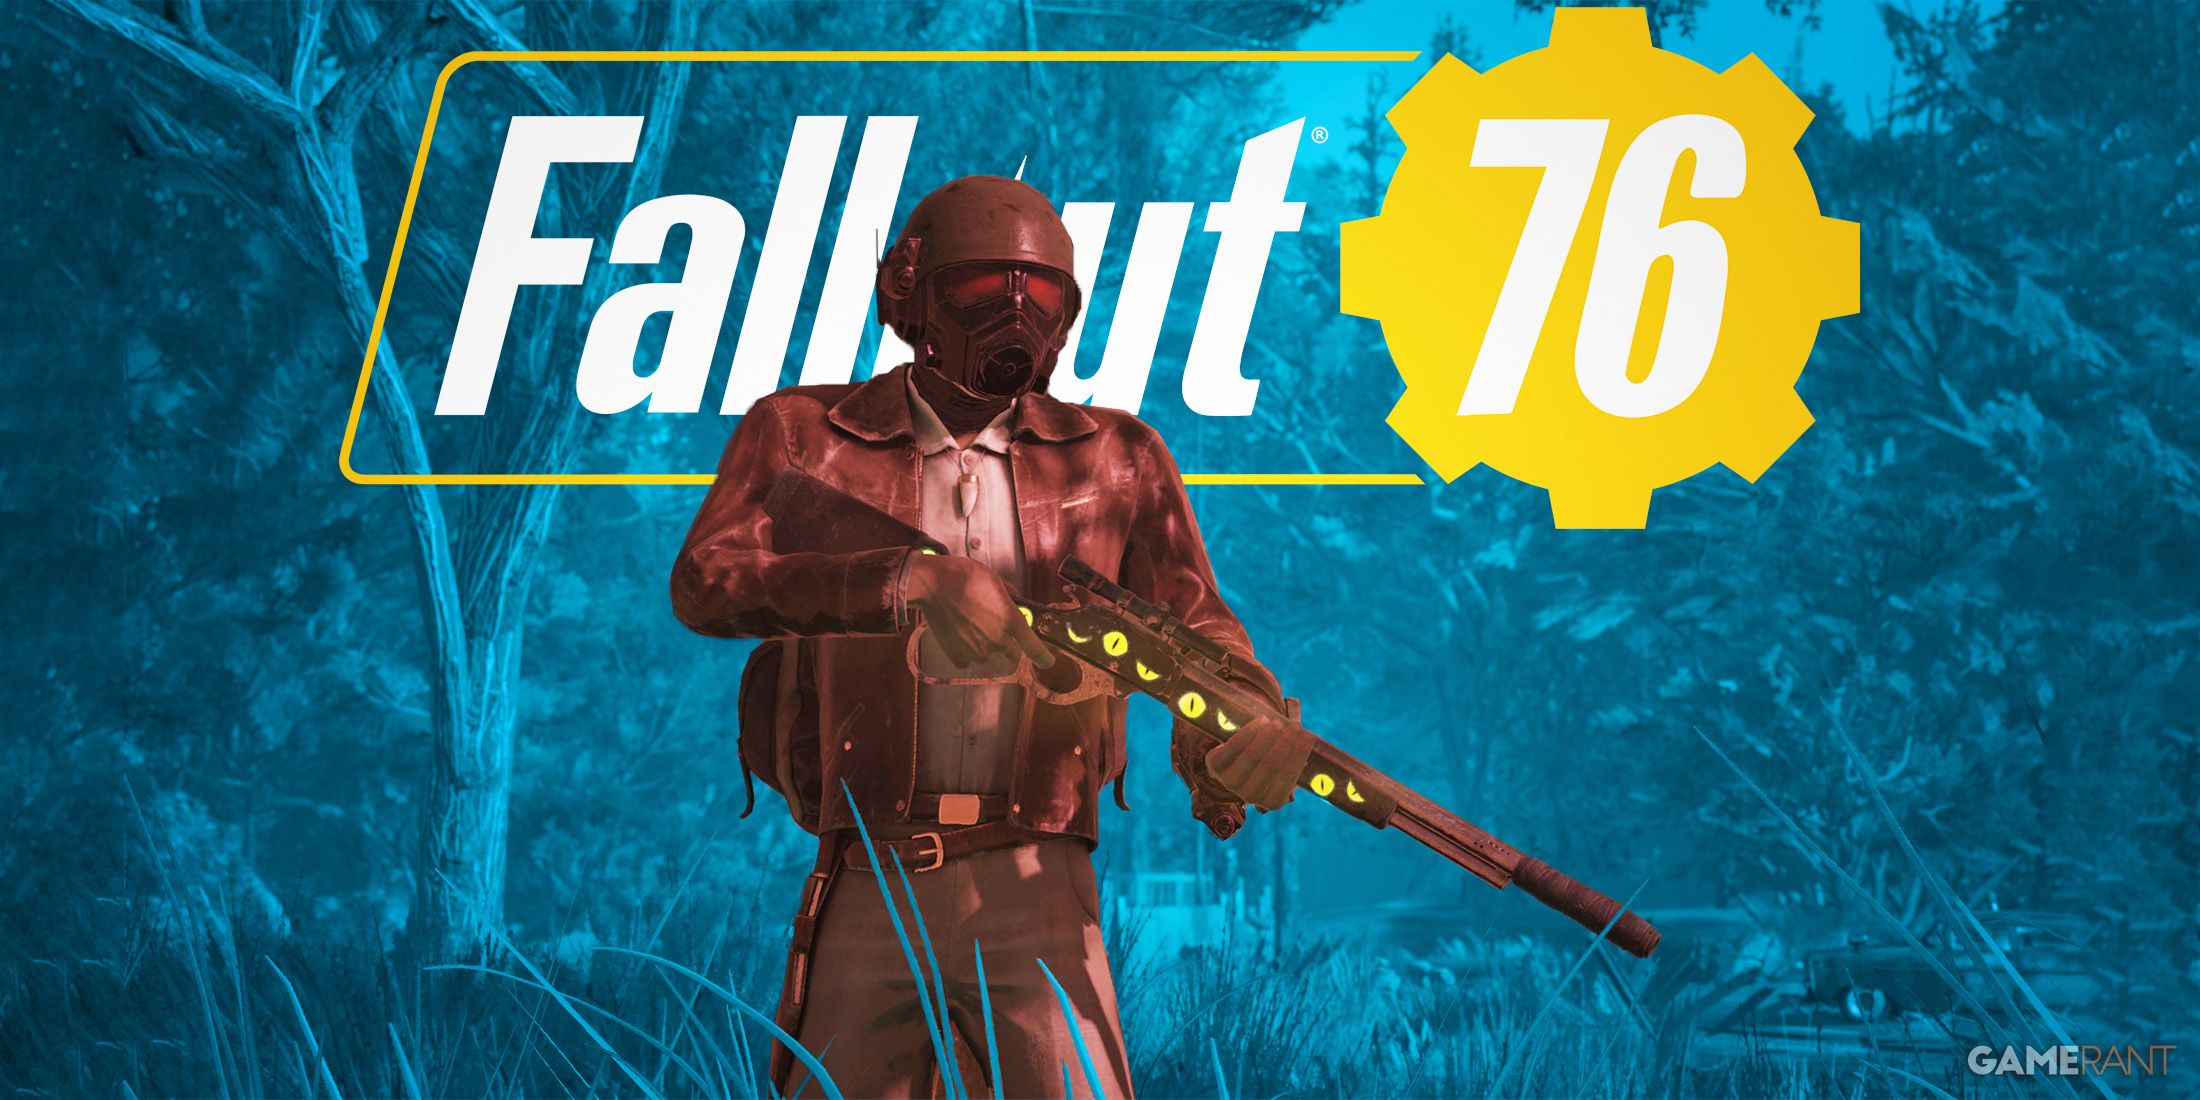 Fallout 76 character holding lever-action sniper rifle in front of game logo blue background edit